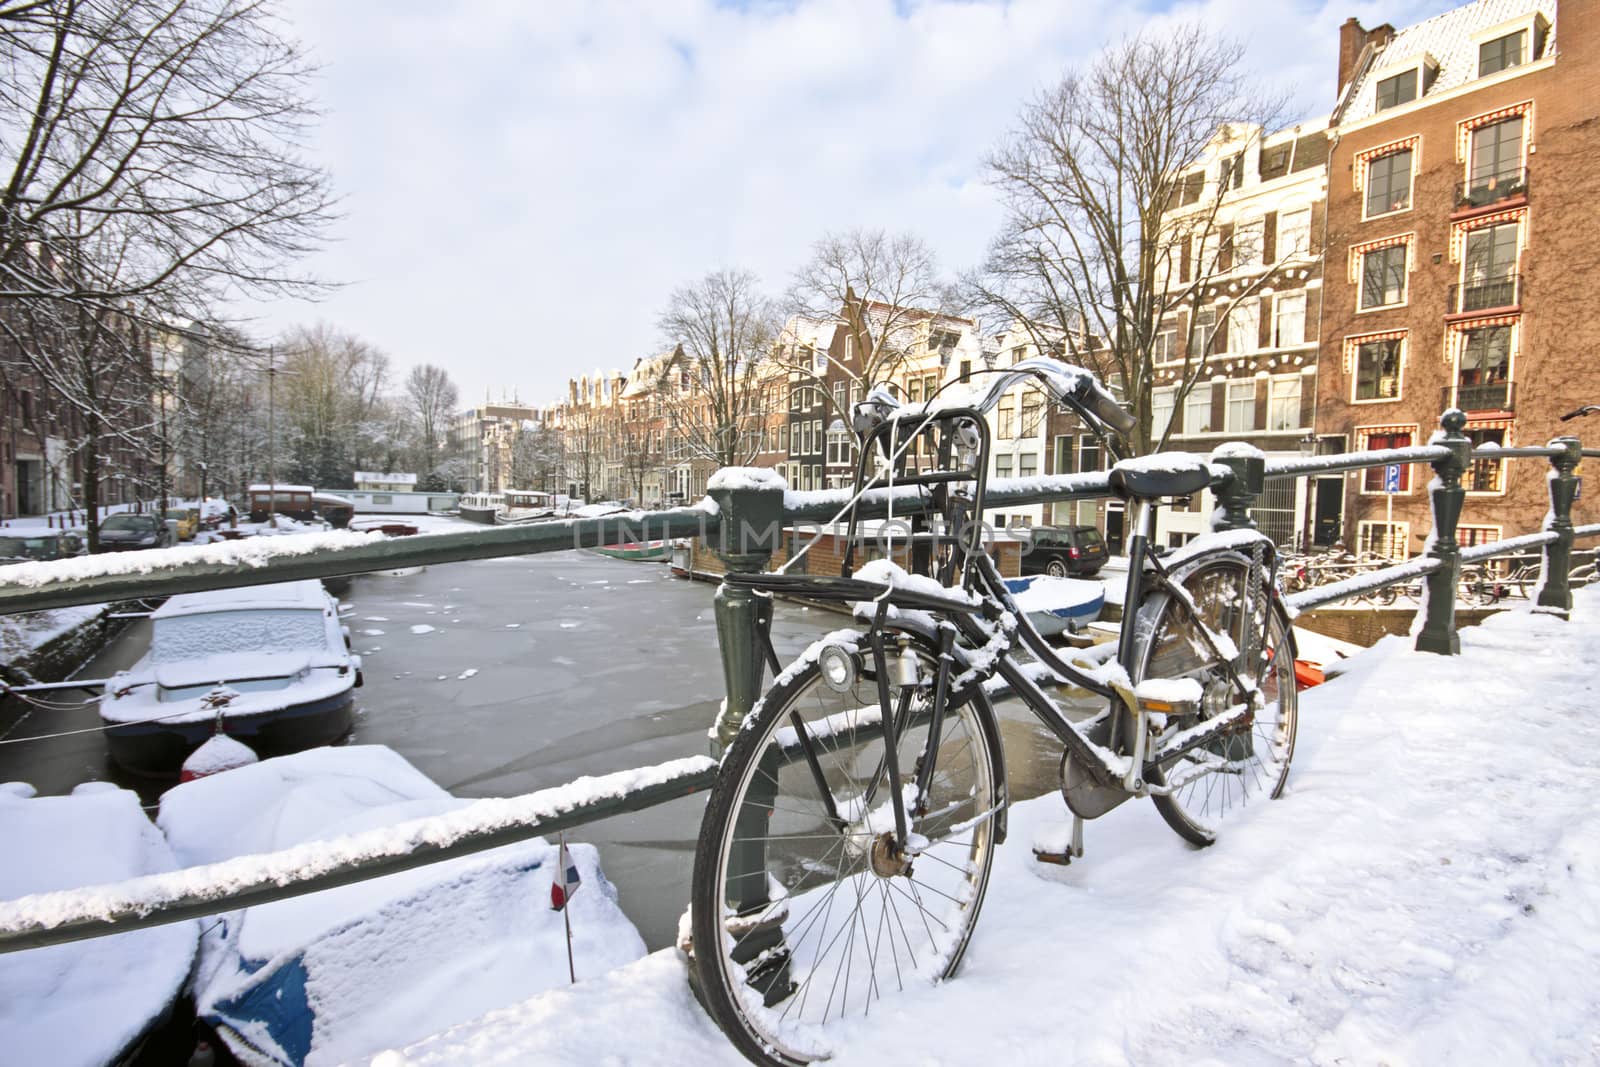 Snowy Amsterdam in the Netherlands by devy